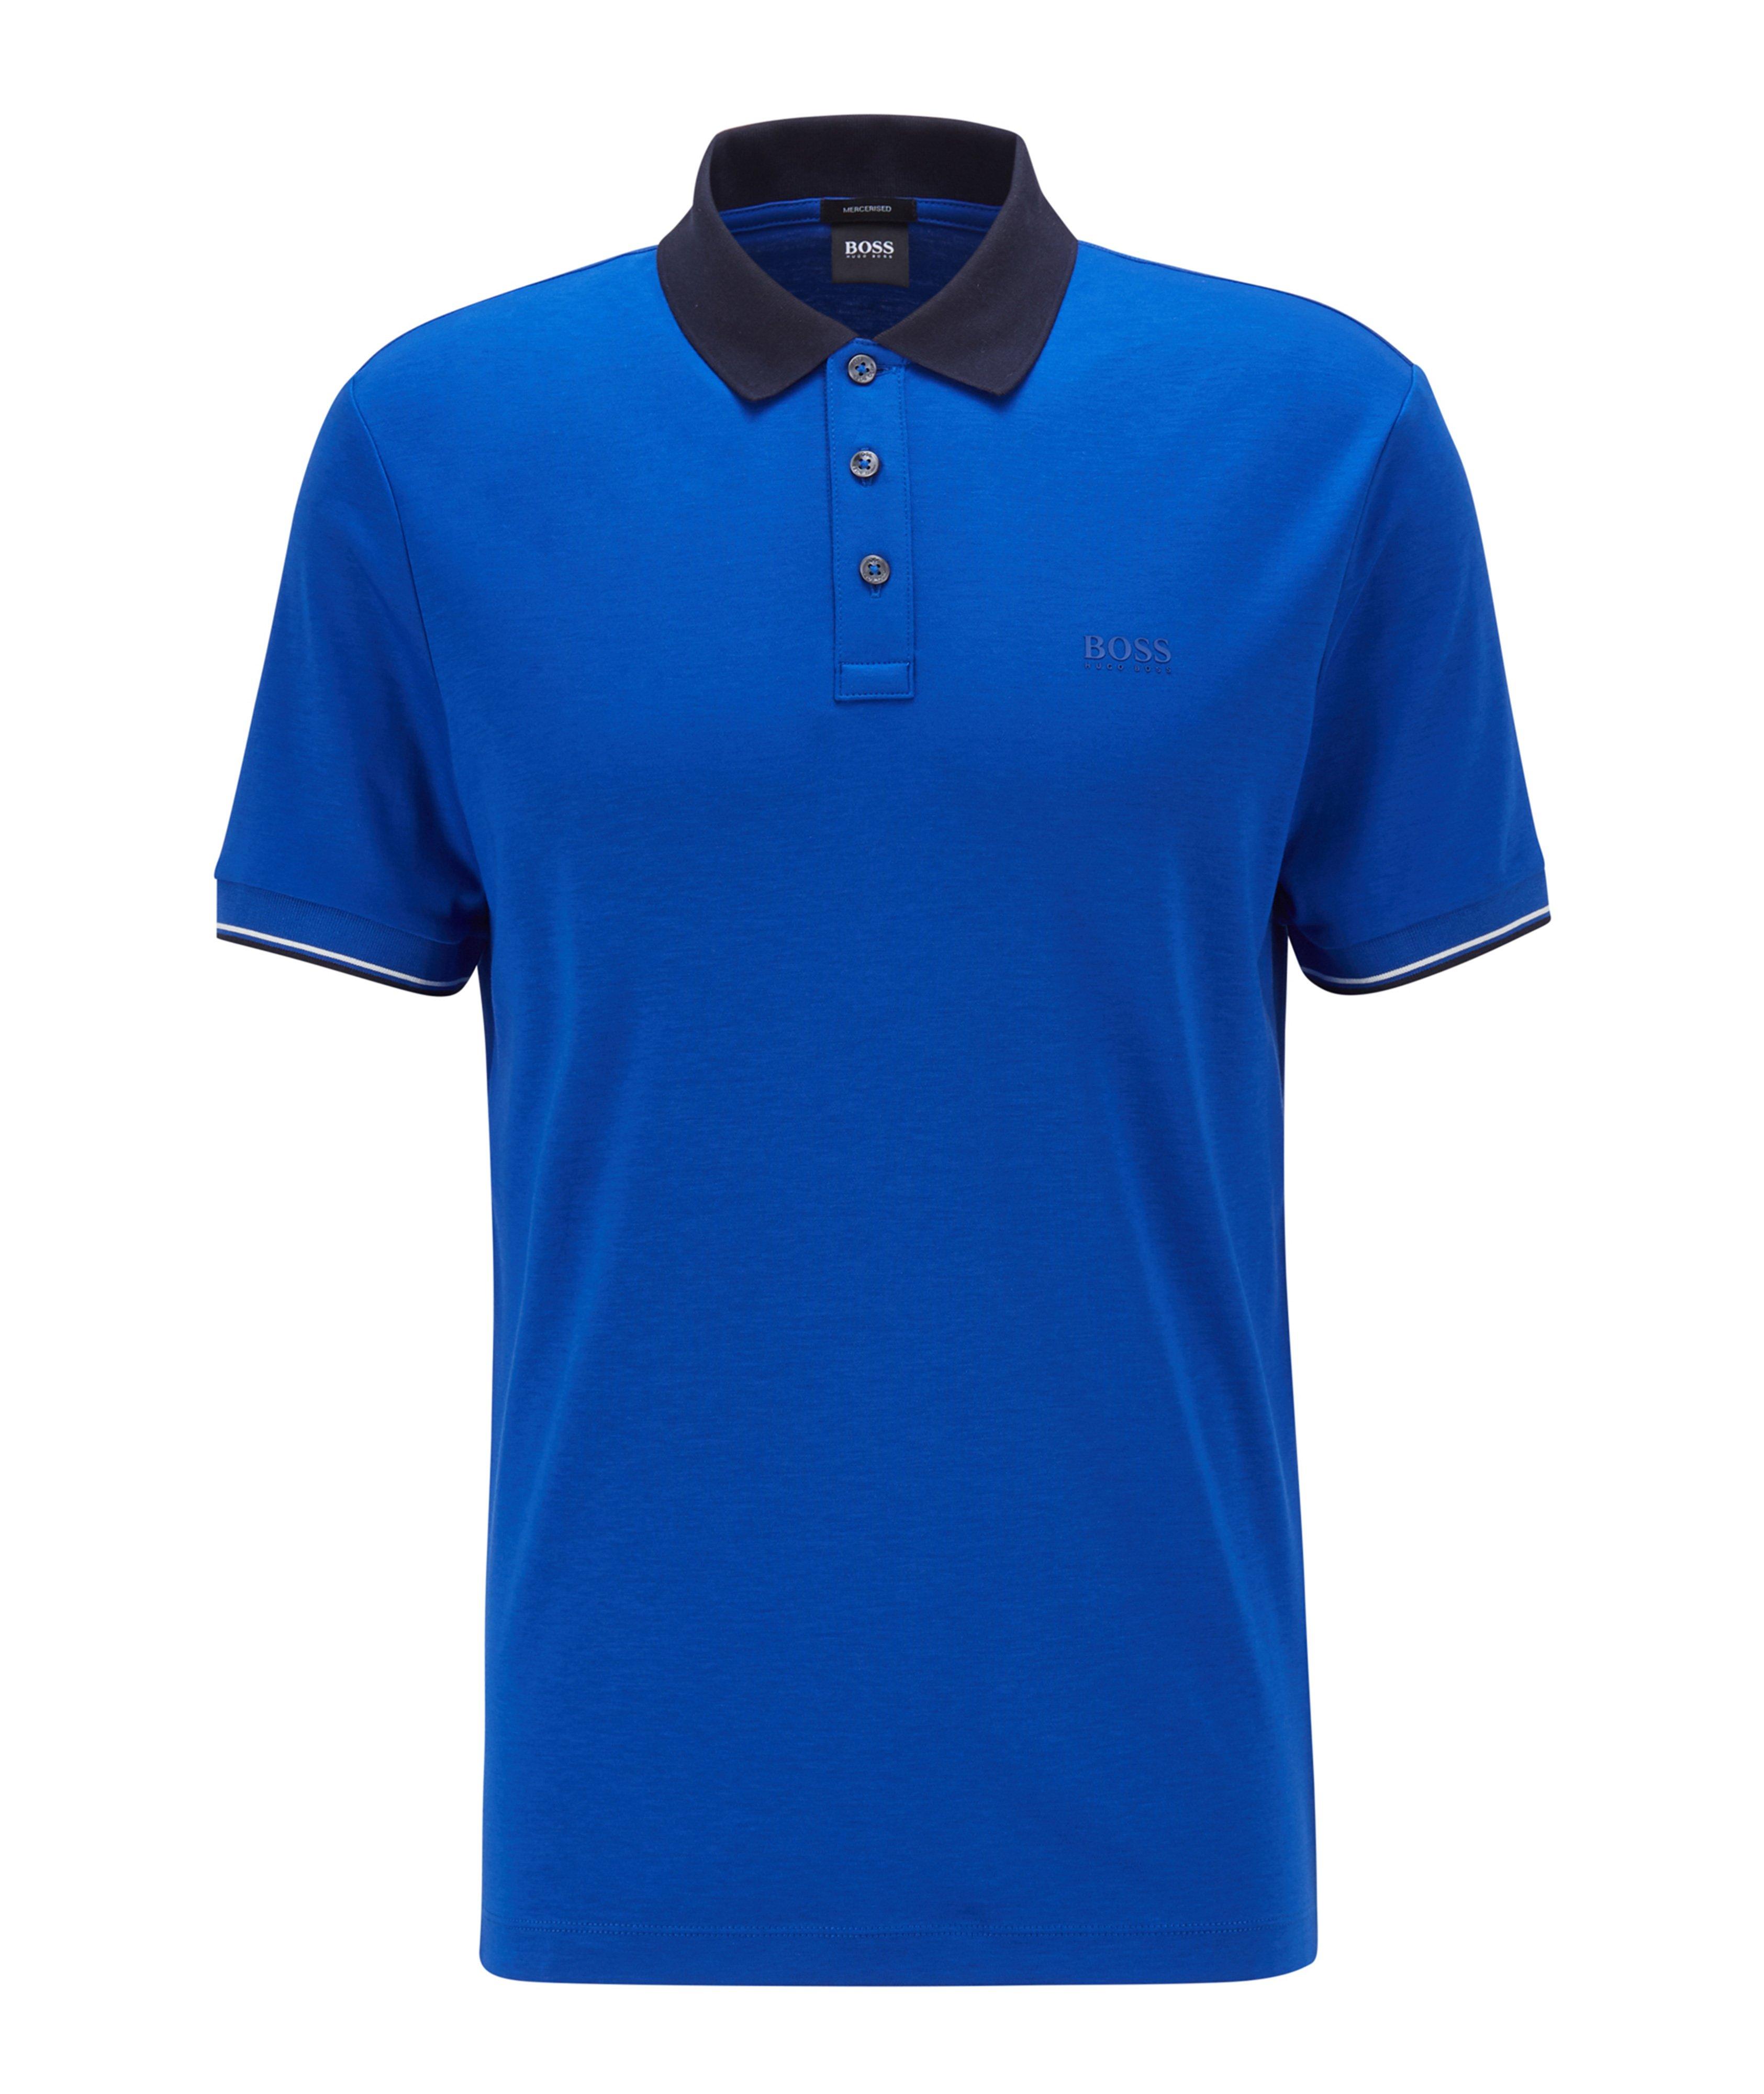 Parlay Contemporary-Fit Polo image 0